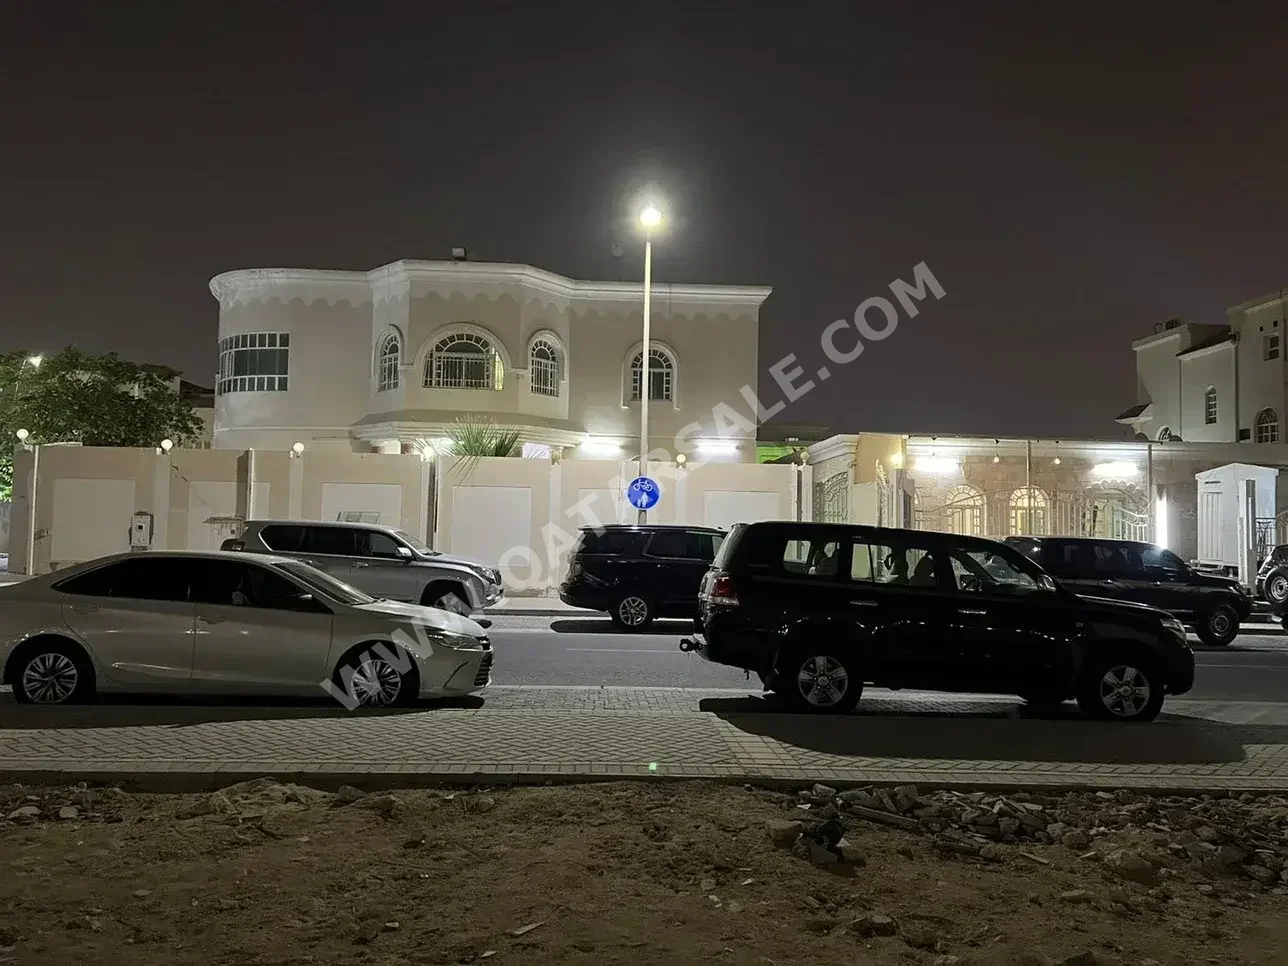 Family Residential  Not Furnished  Al Rayyan  Muaither  10 Bedrooms